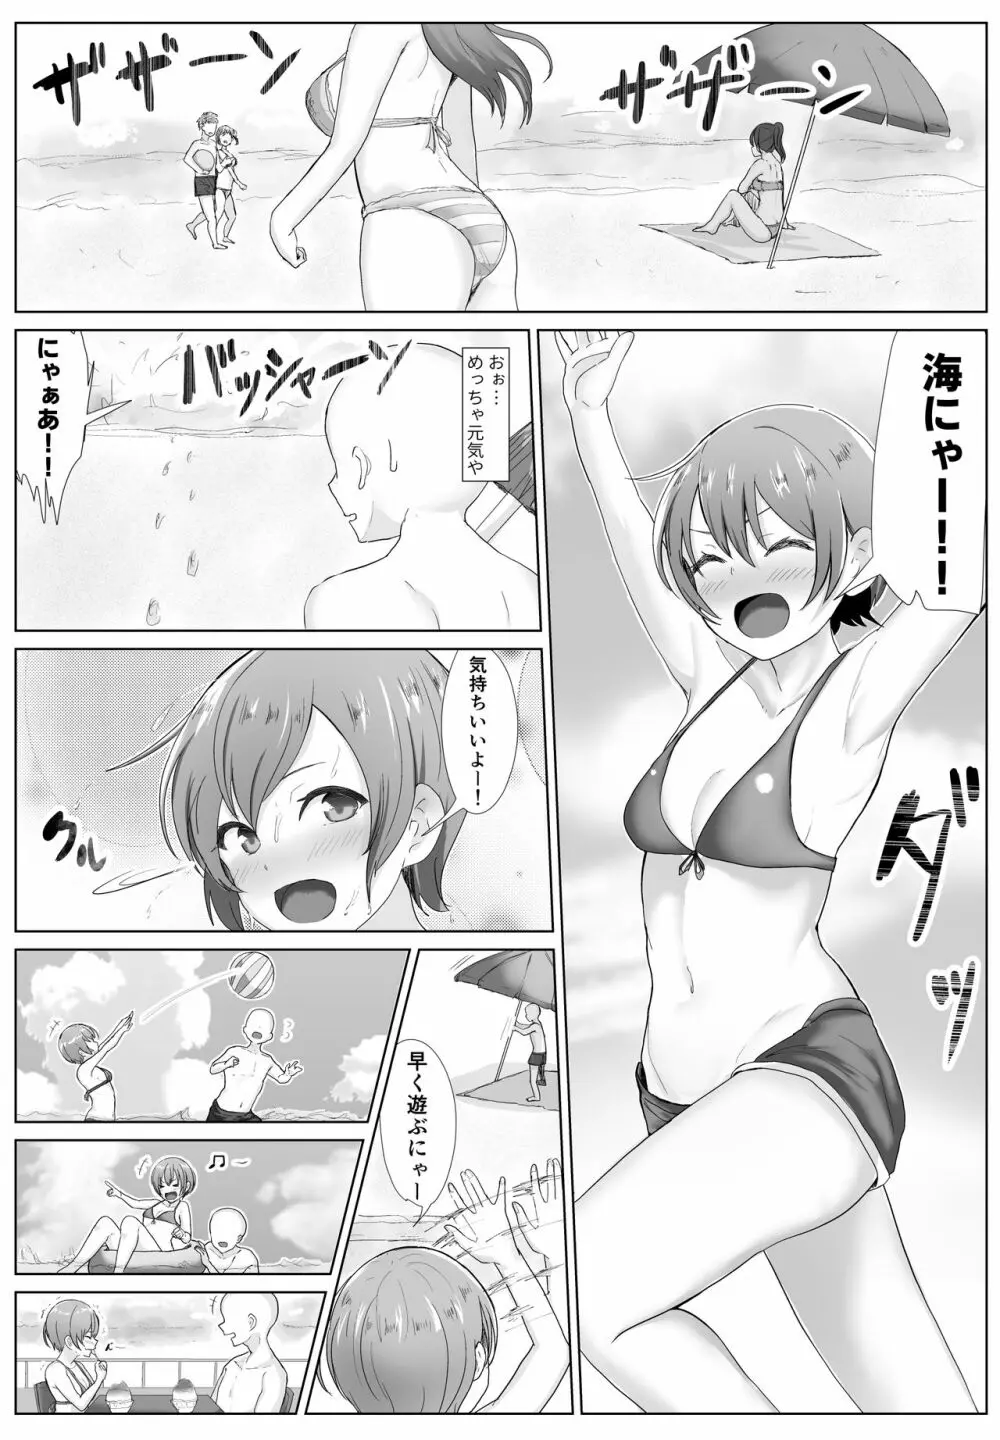 e-rn fanbox short love live doujinshi collection - page1